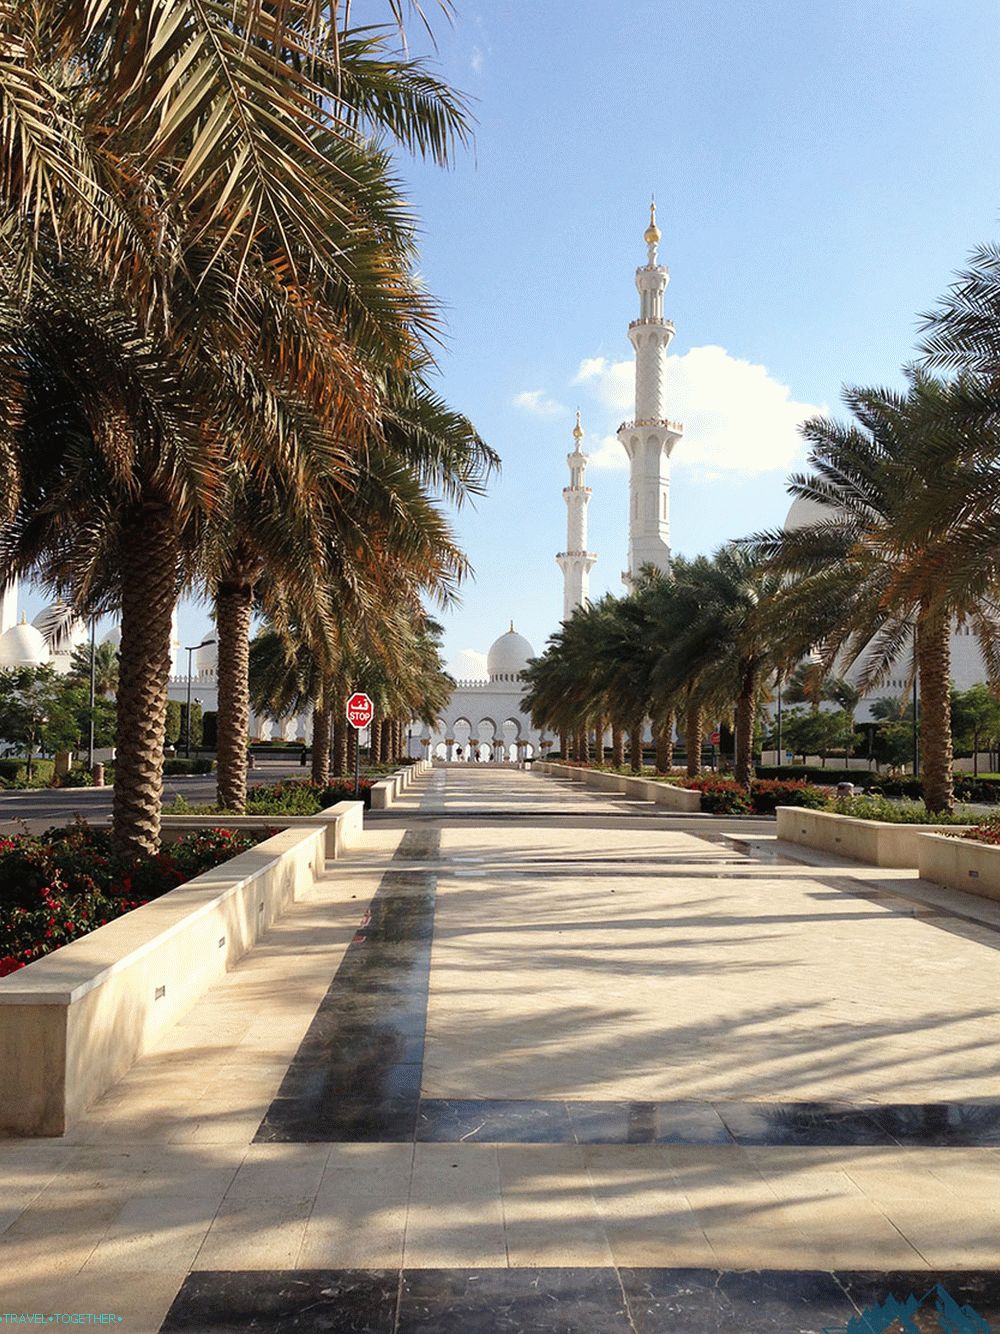 Excursion to the Sheikh Zayed Mosque in Abu Dhabi